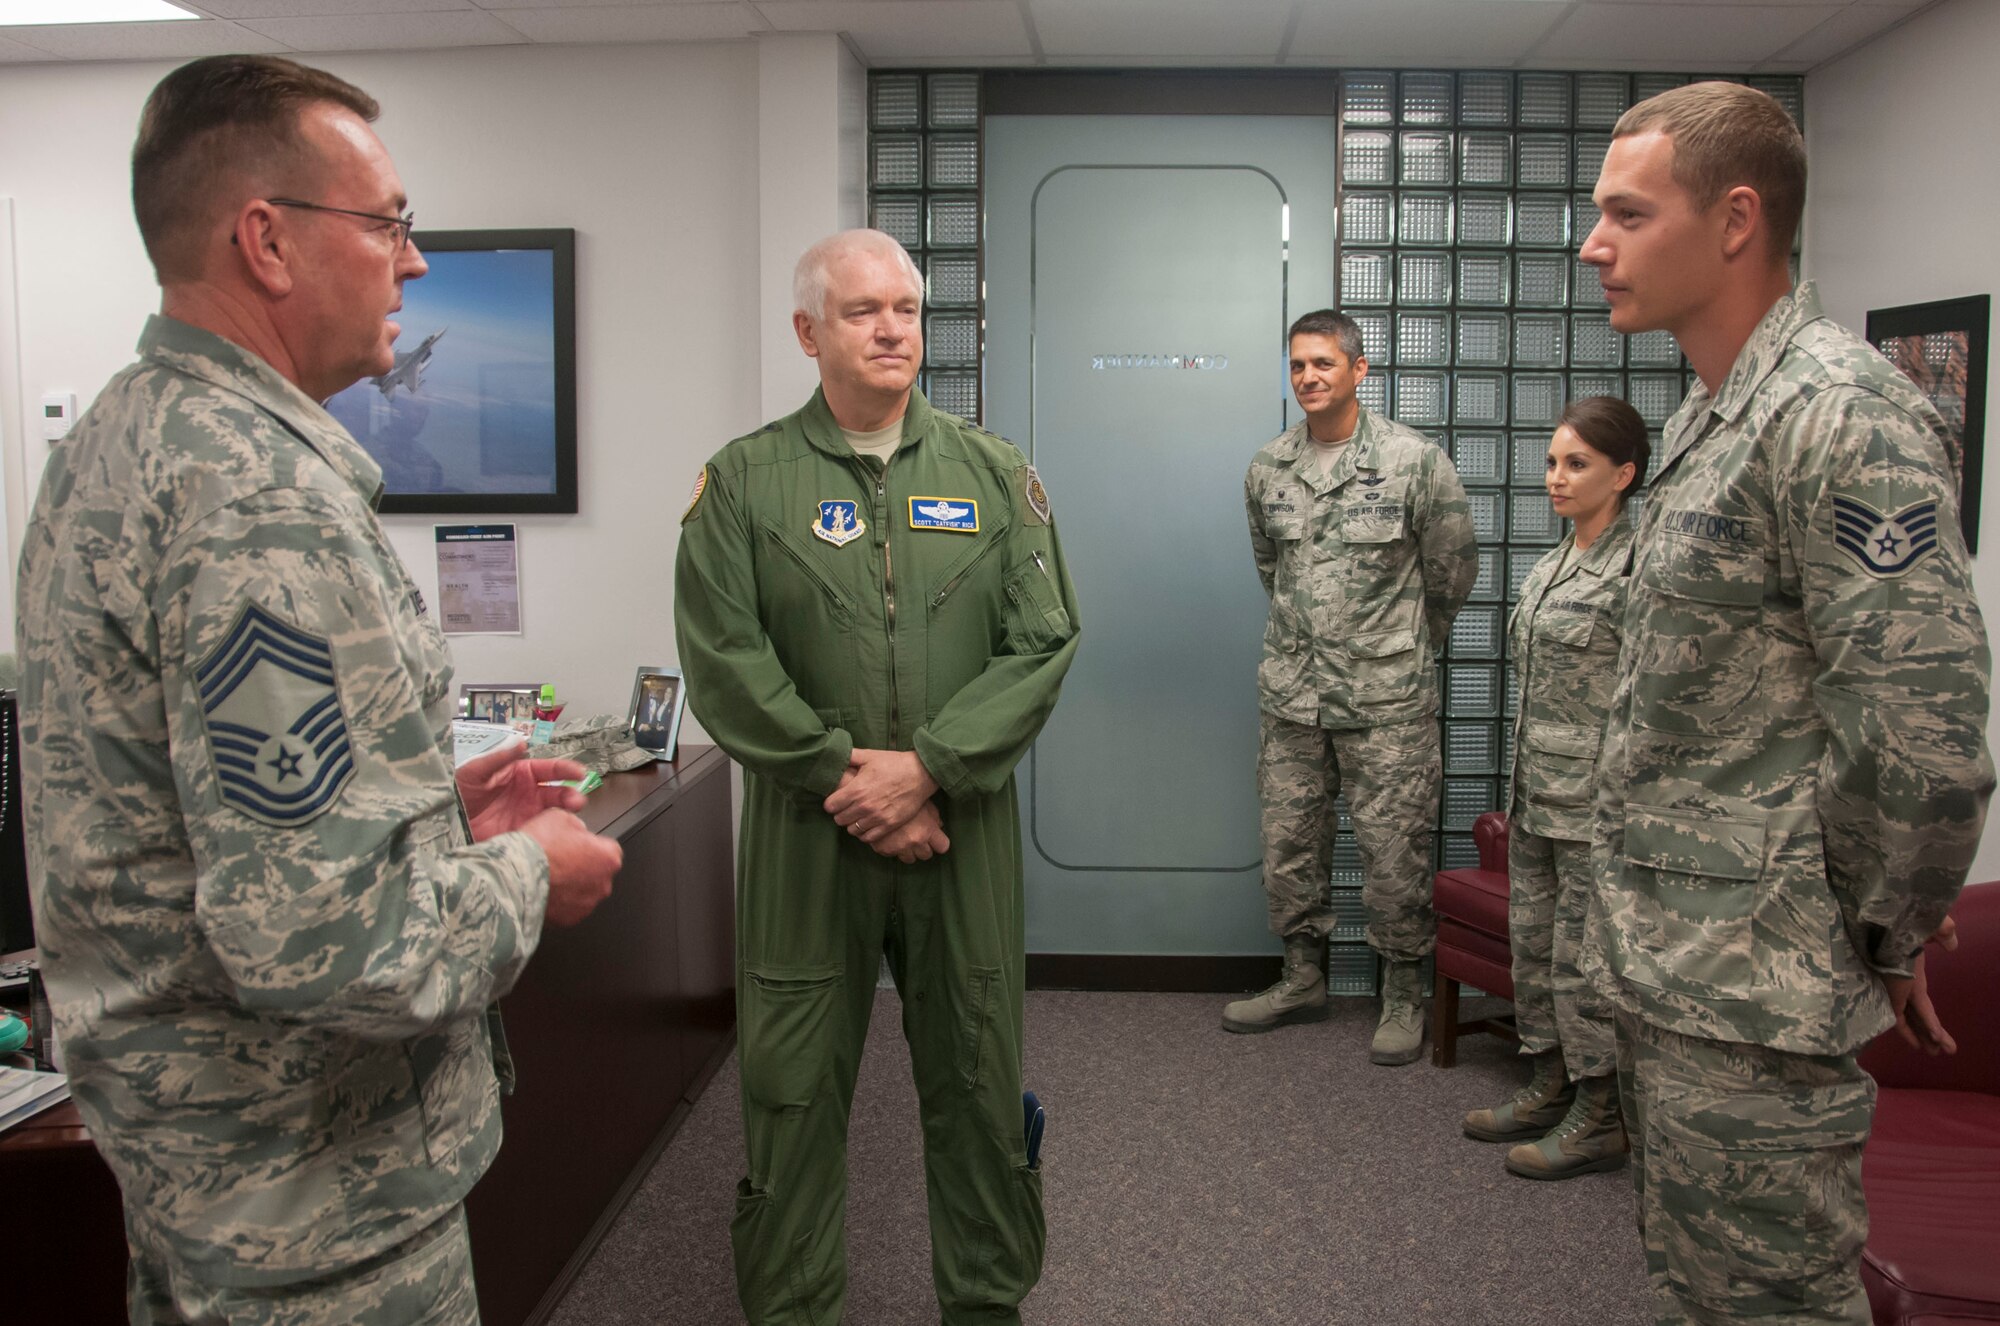 Lt. Gen. L. Scott Rice, director of the Air National Guard, greets 162nd Wing Airmen during a visit to the Arizona Air National Guard base at Tucson International Airport, June 29-30.  The visit is Rice’s first since becoming director. He met with Airmen and recognized outstanding accomplishments. (U.S. Air National Guard photo by 1st Lt. Lacey Roberts)